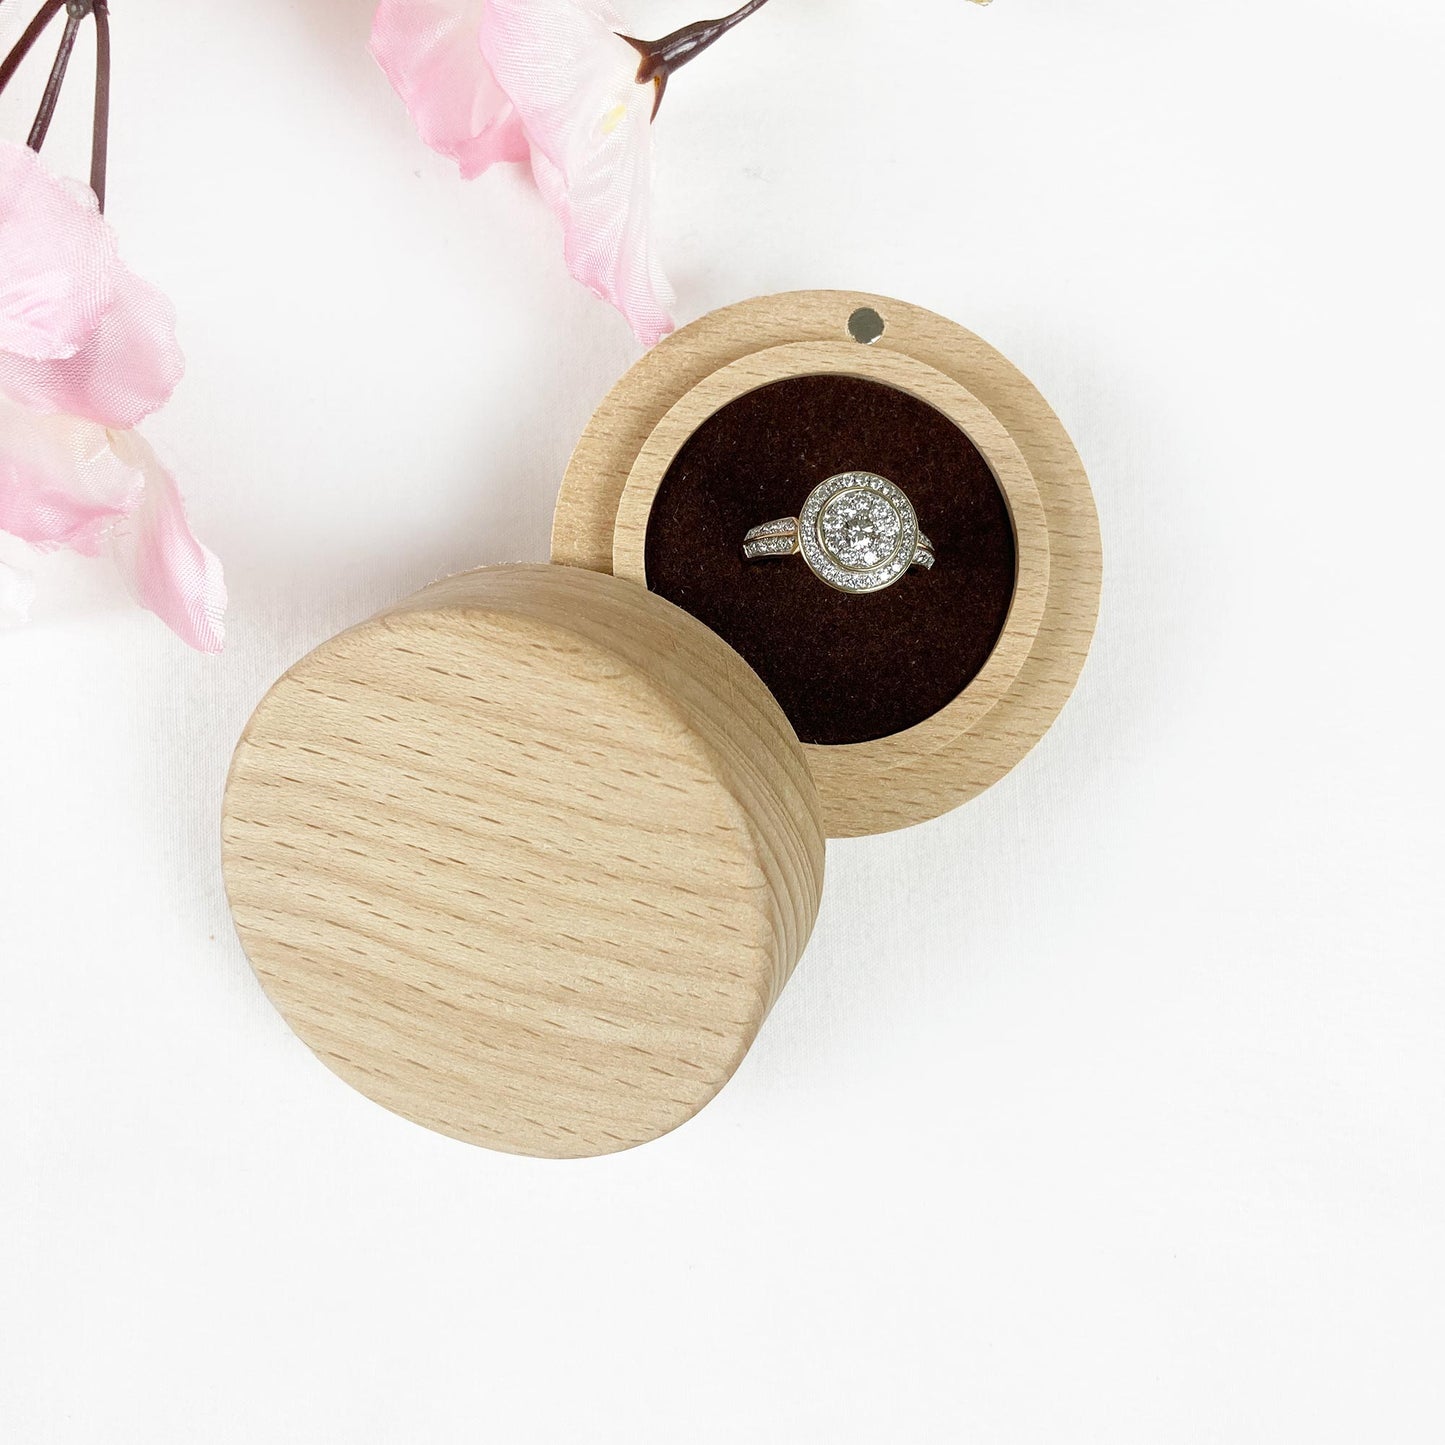 Engraved Round Wooden Ring box Gift Custom Names Surname & Date Floral Frame